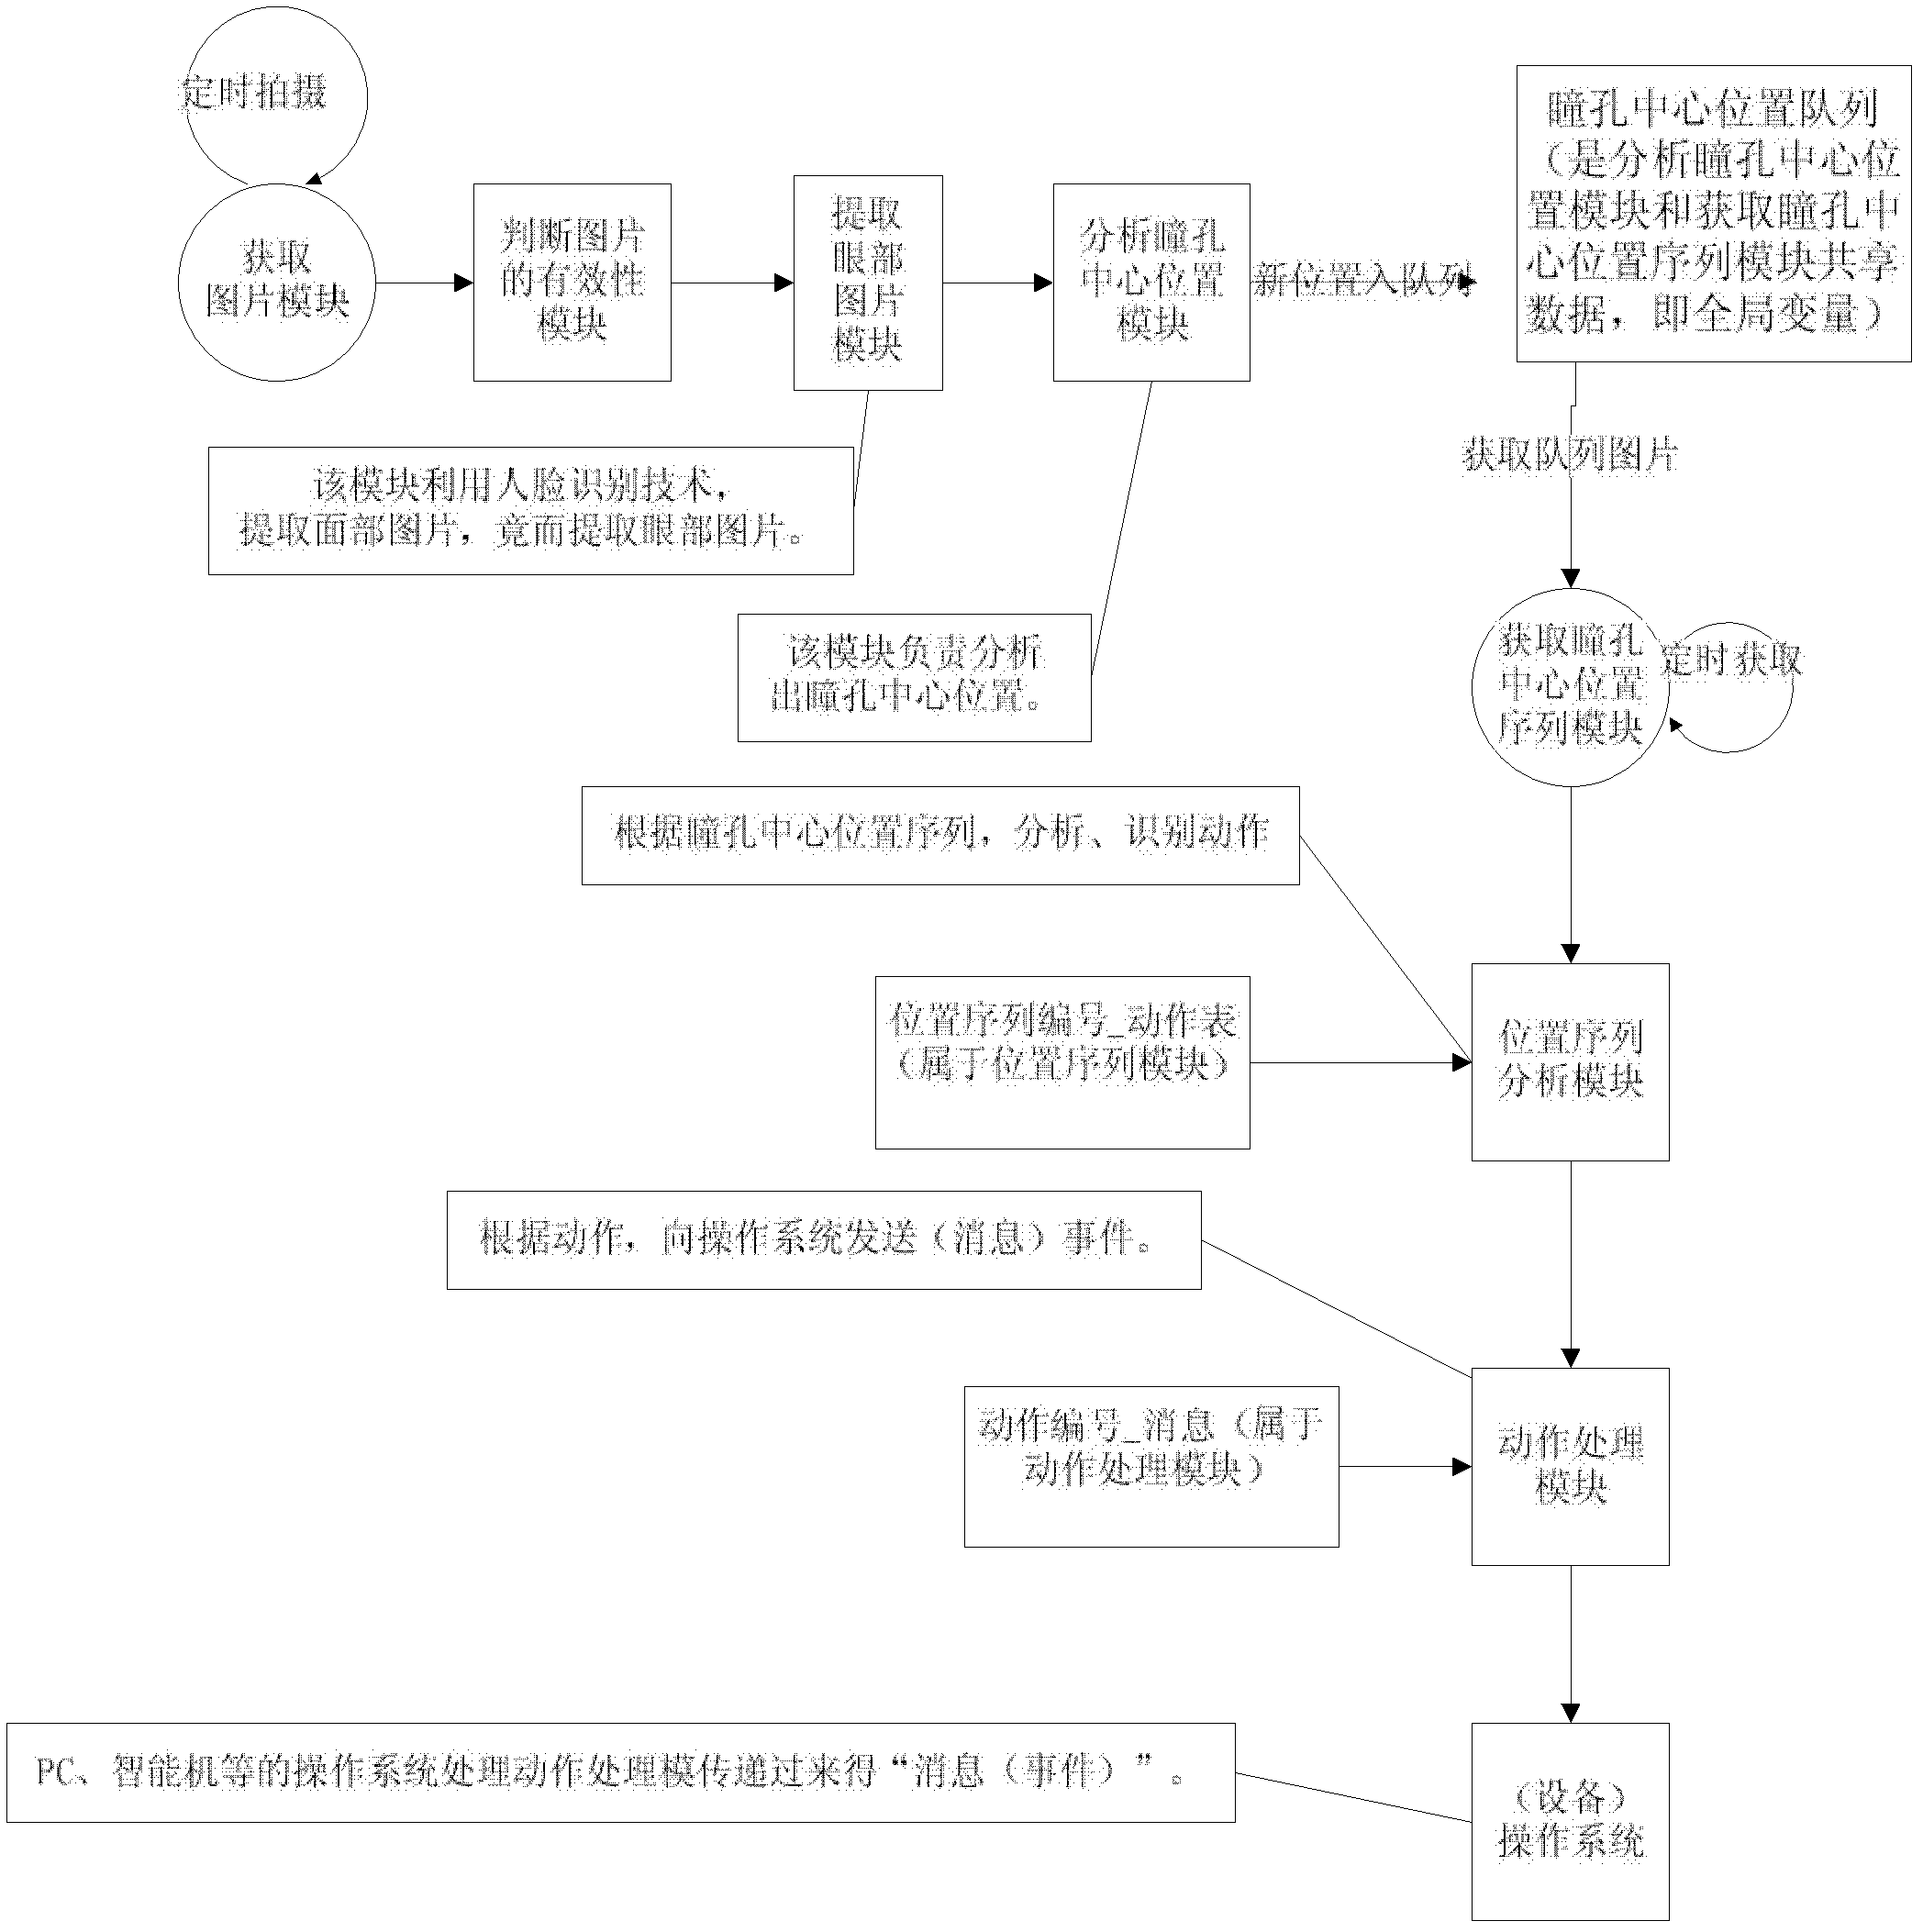 Device and method for implementation of man-machine information interaction based on eye motion recognition